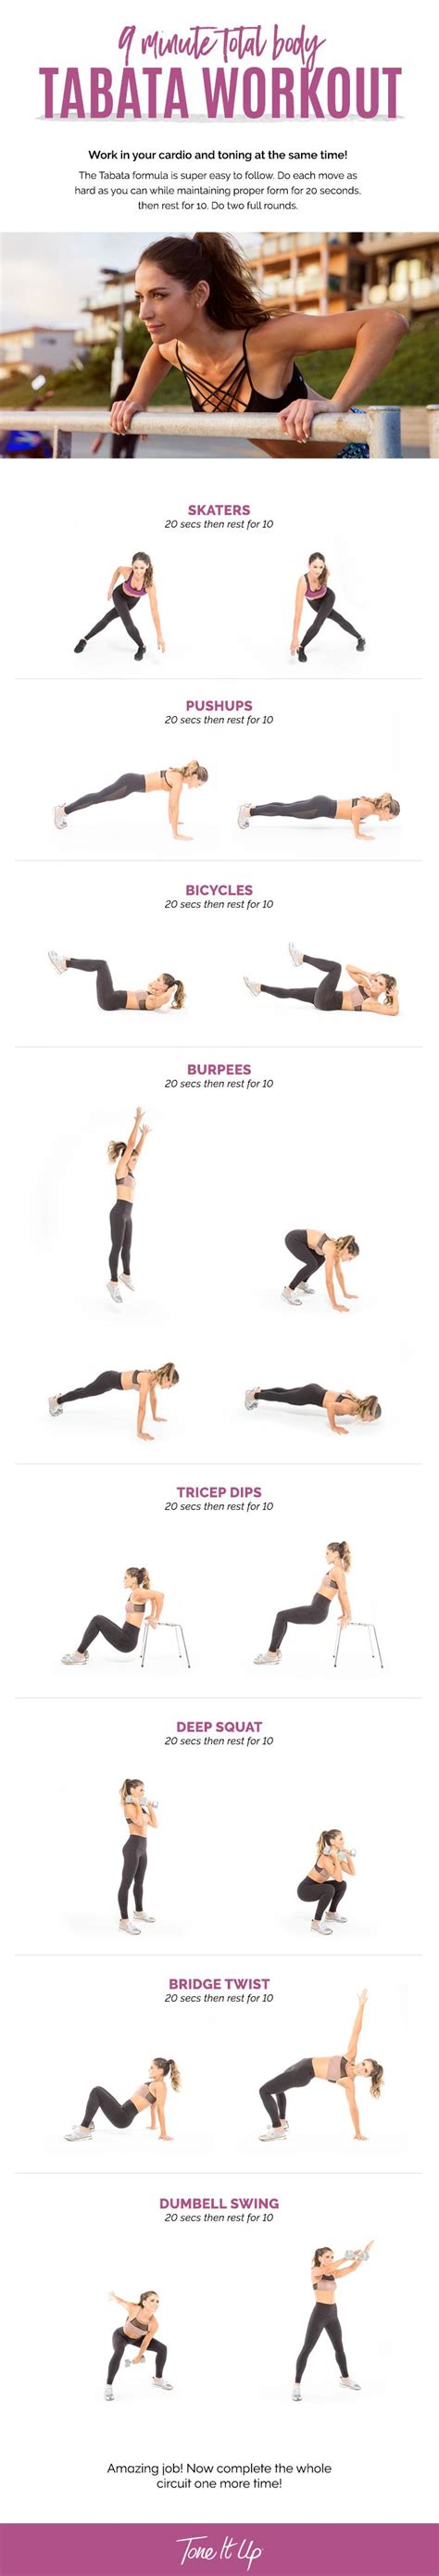 9 Minute Total Body Tabata Workout Tabata Workouts